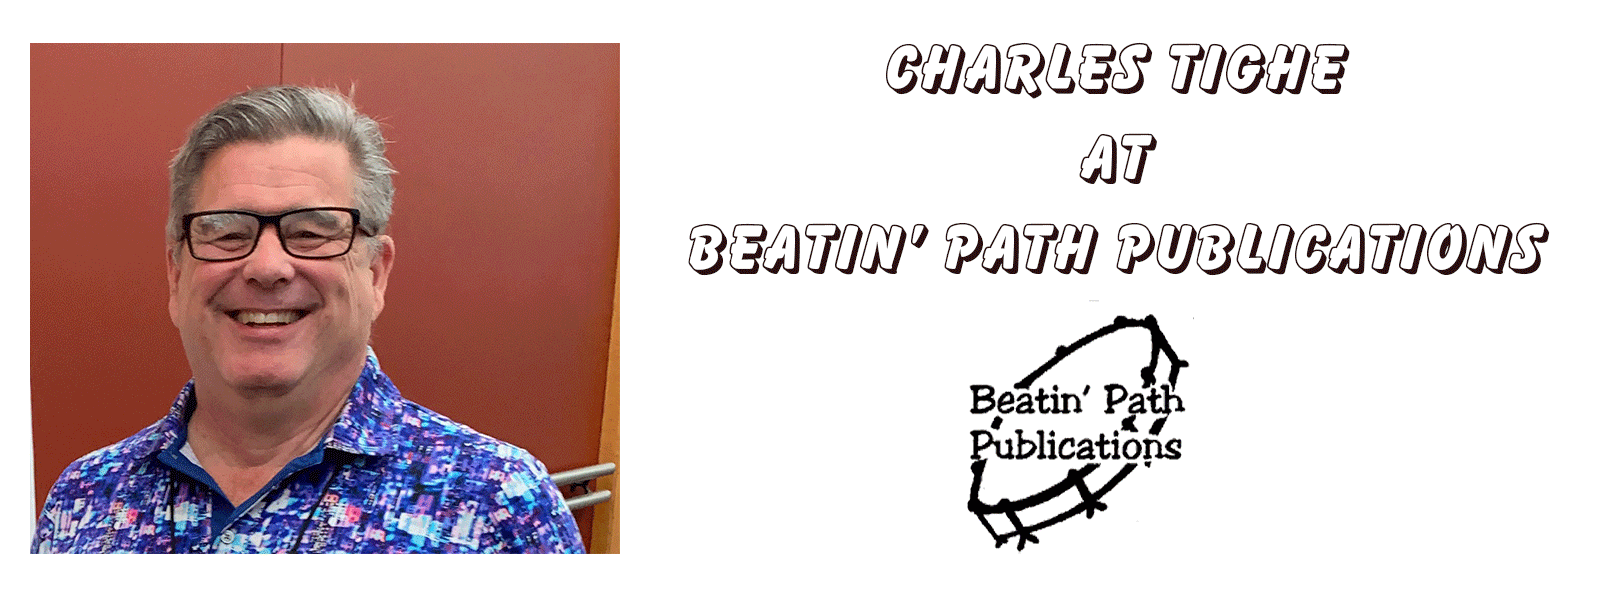 Charles Tighe at Beatin' Path Publications